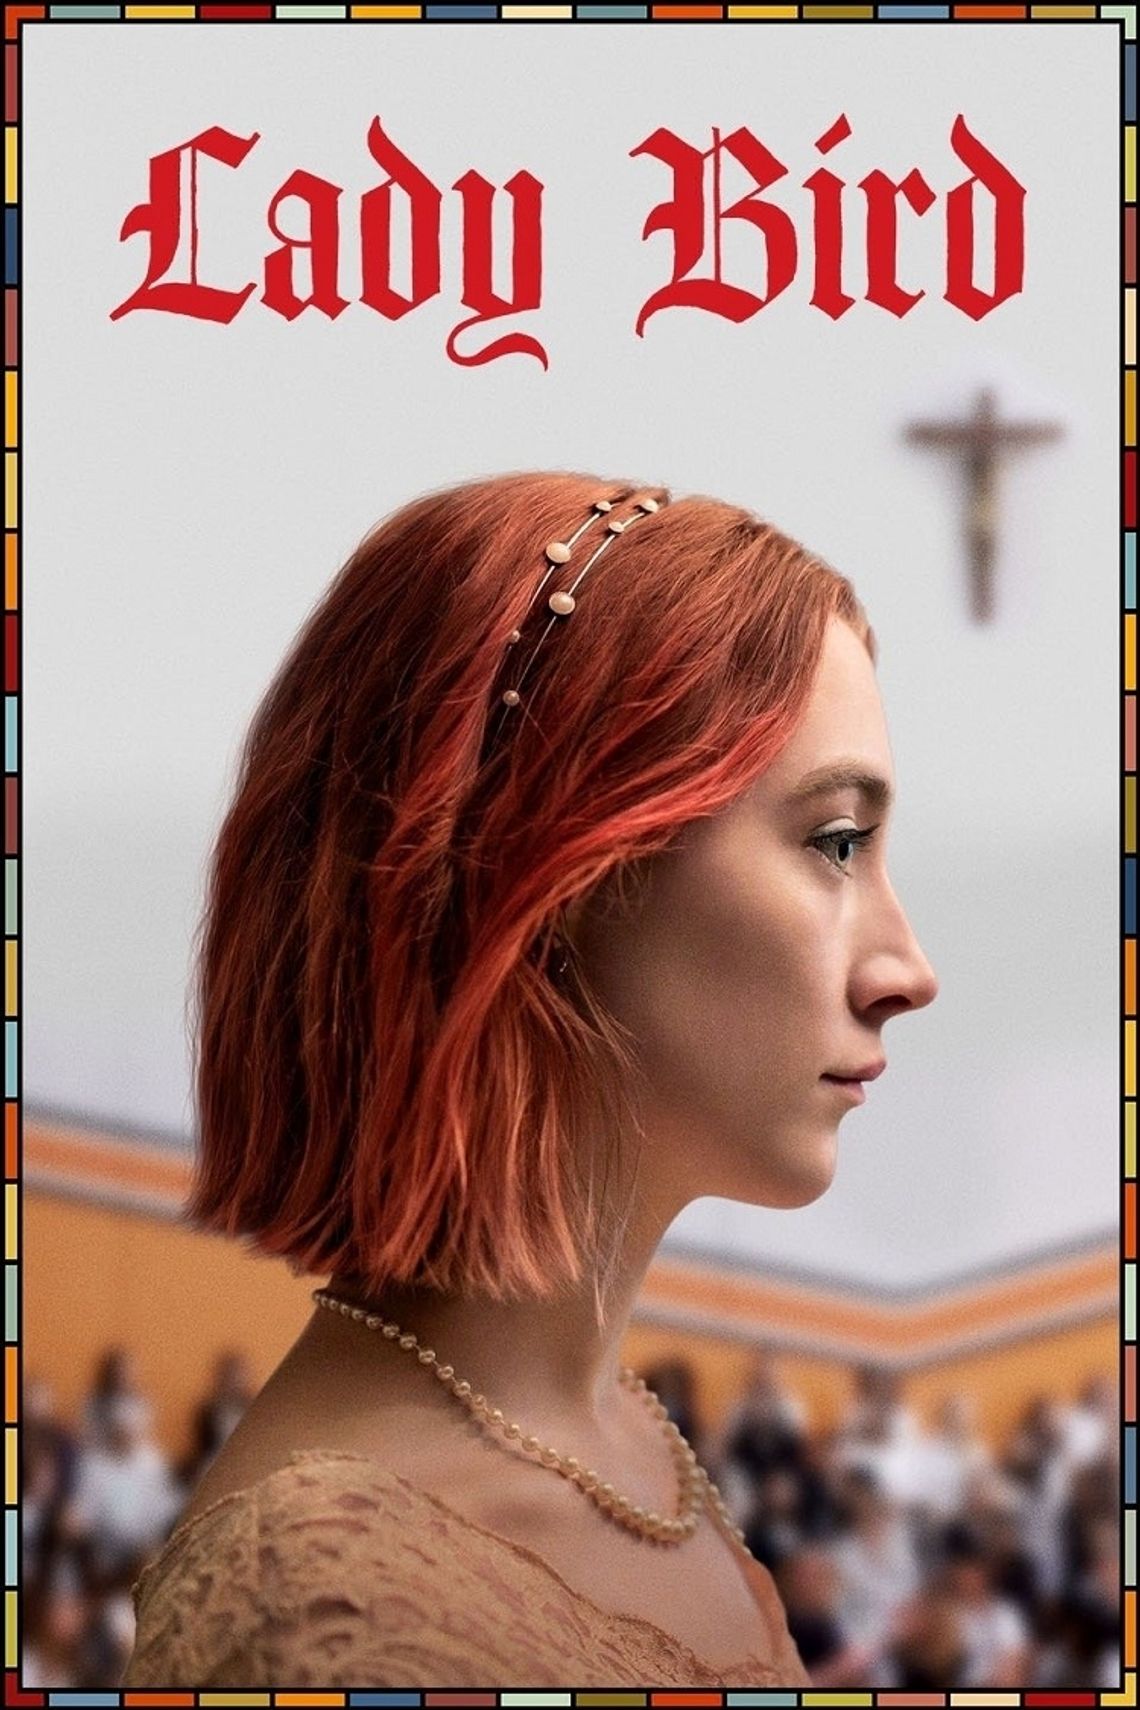 Fall Film Series Continues Friday at Oats Park -- Lady Bird (2017)